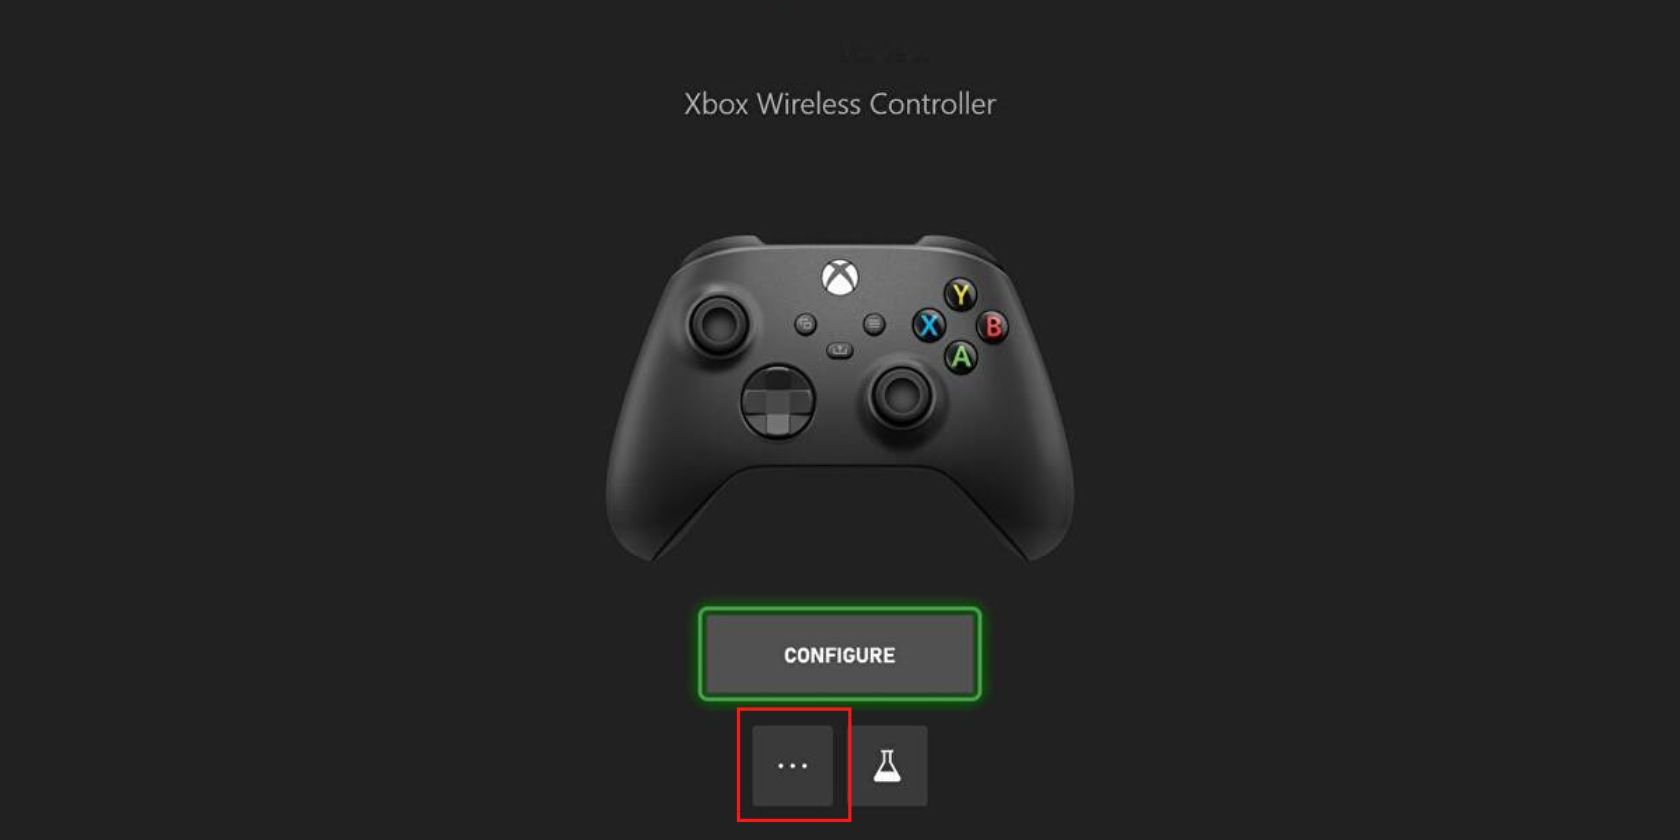 How to assign account to Xbox Wireless Controller More Options button